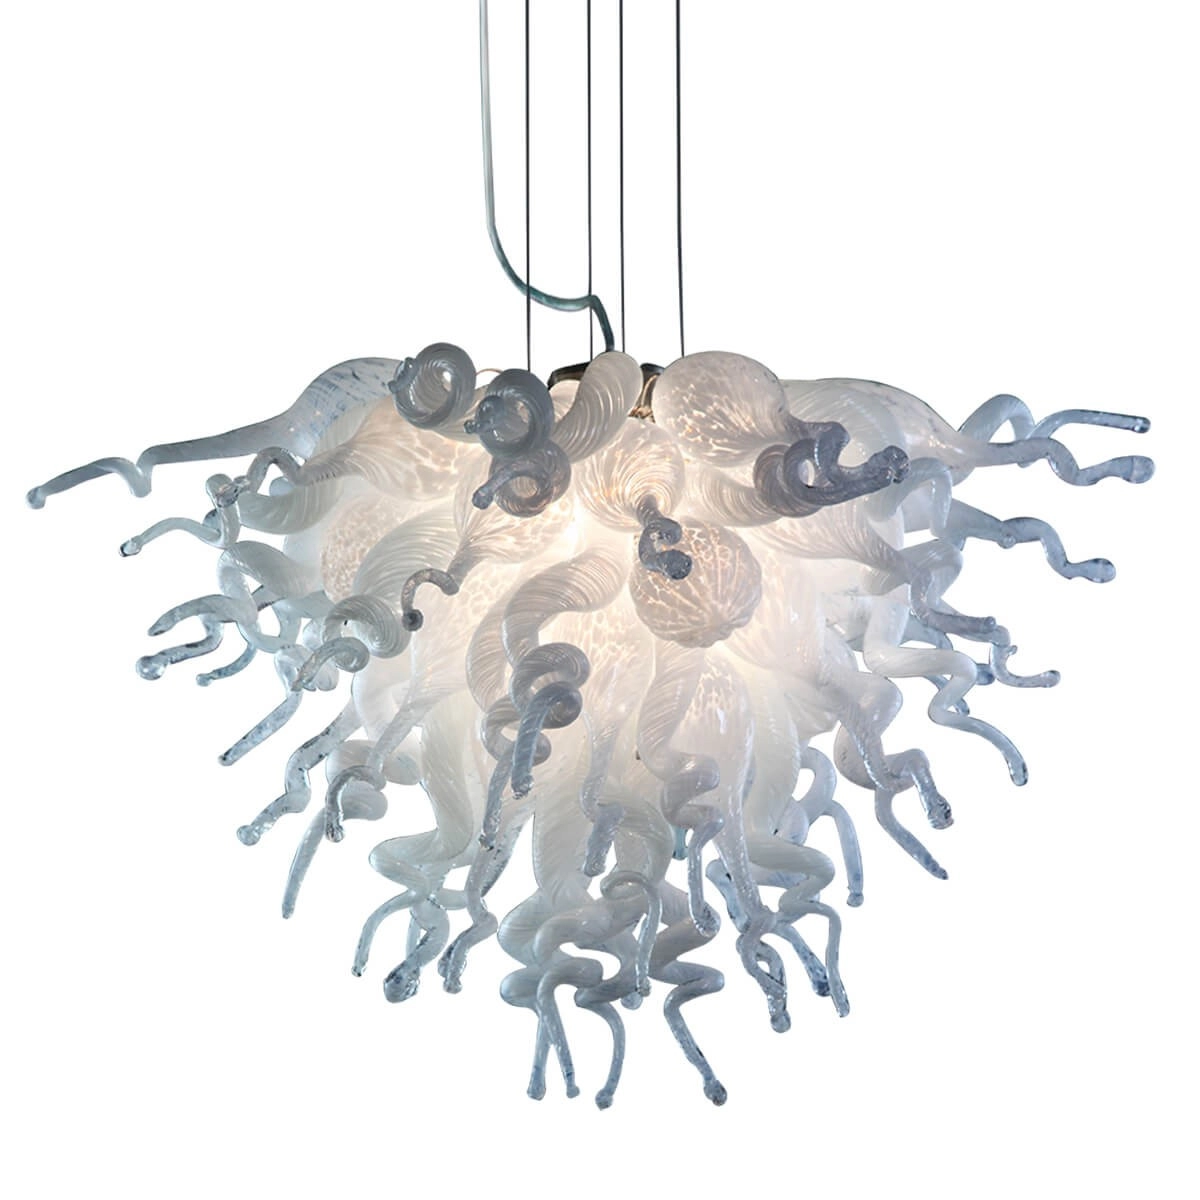 Opaline white chihuly pendant glass chandelier